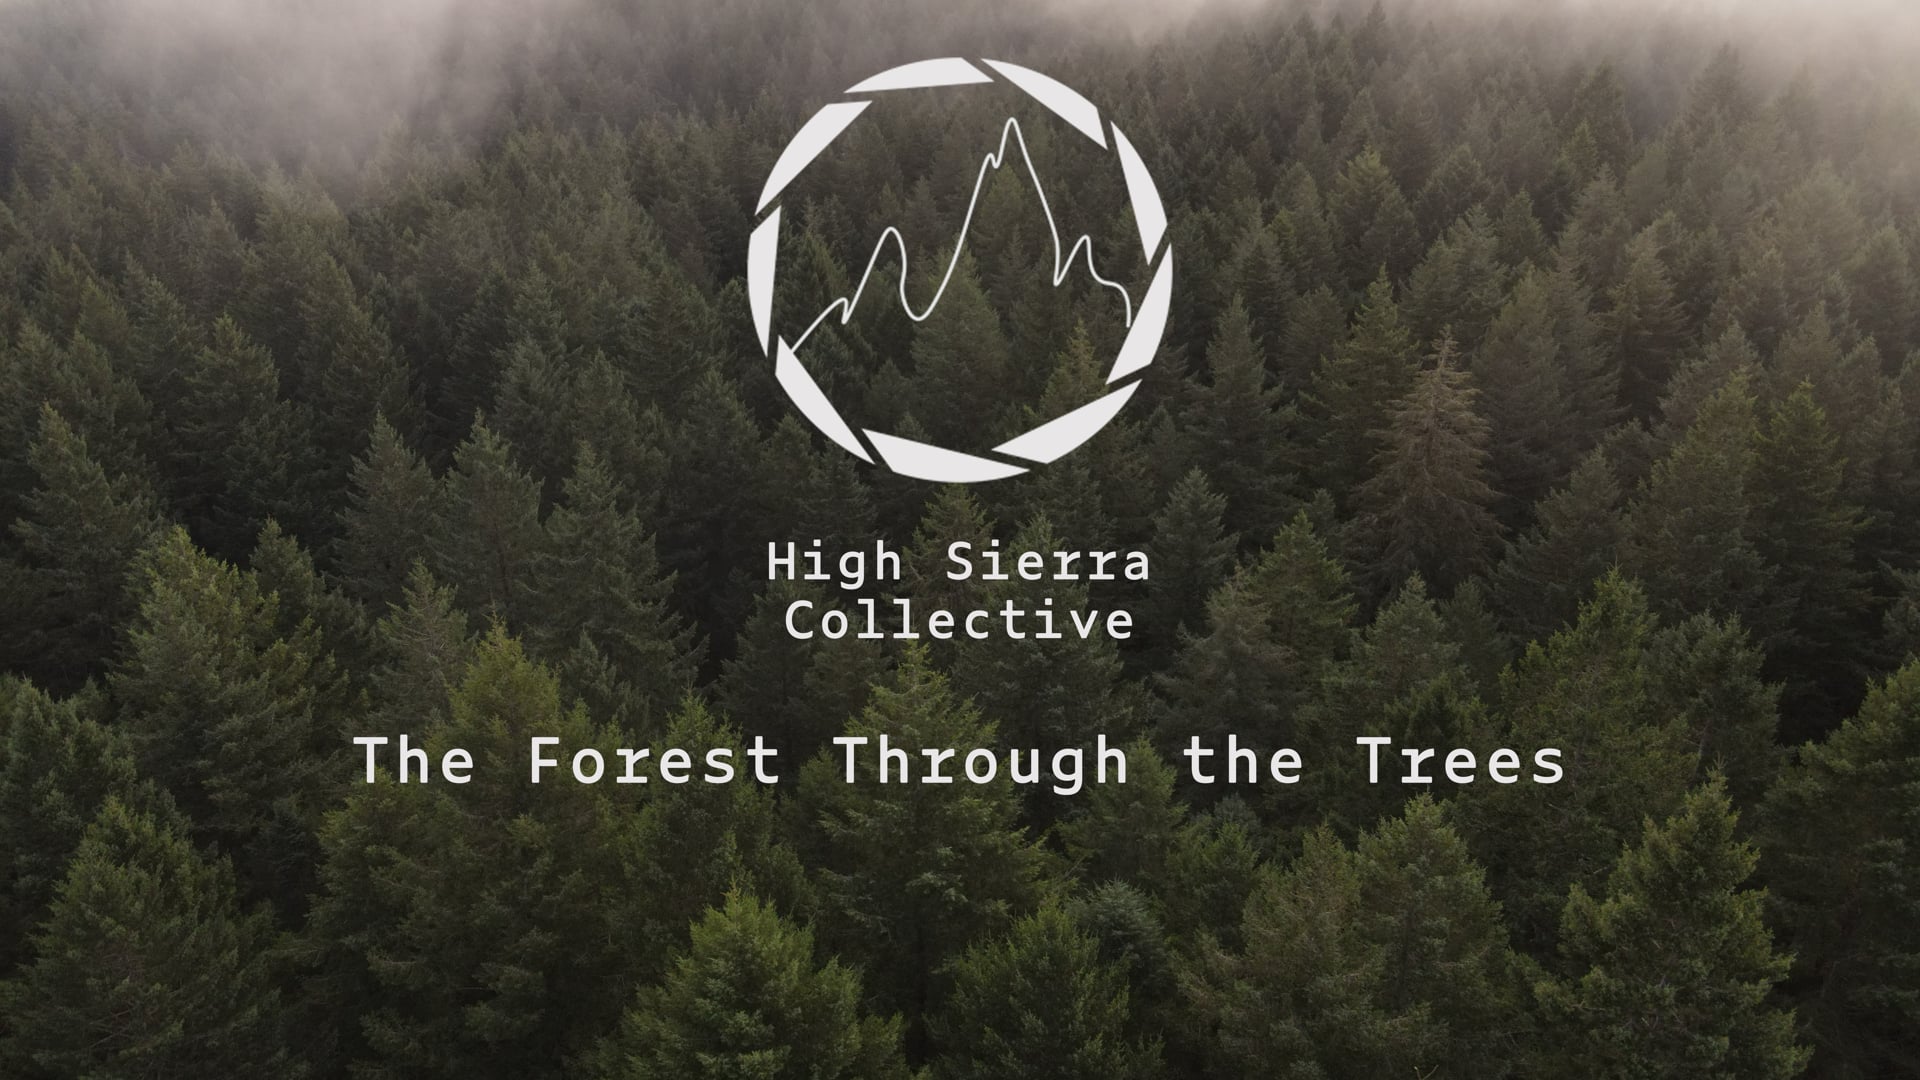 Promotional video thumbnail 1 for High Sierra Collective